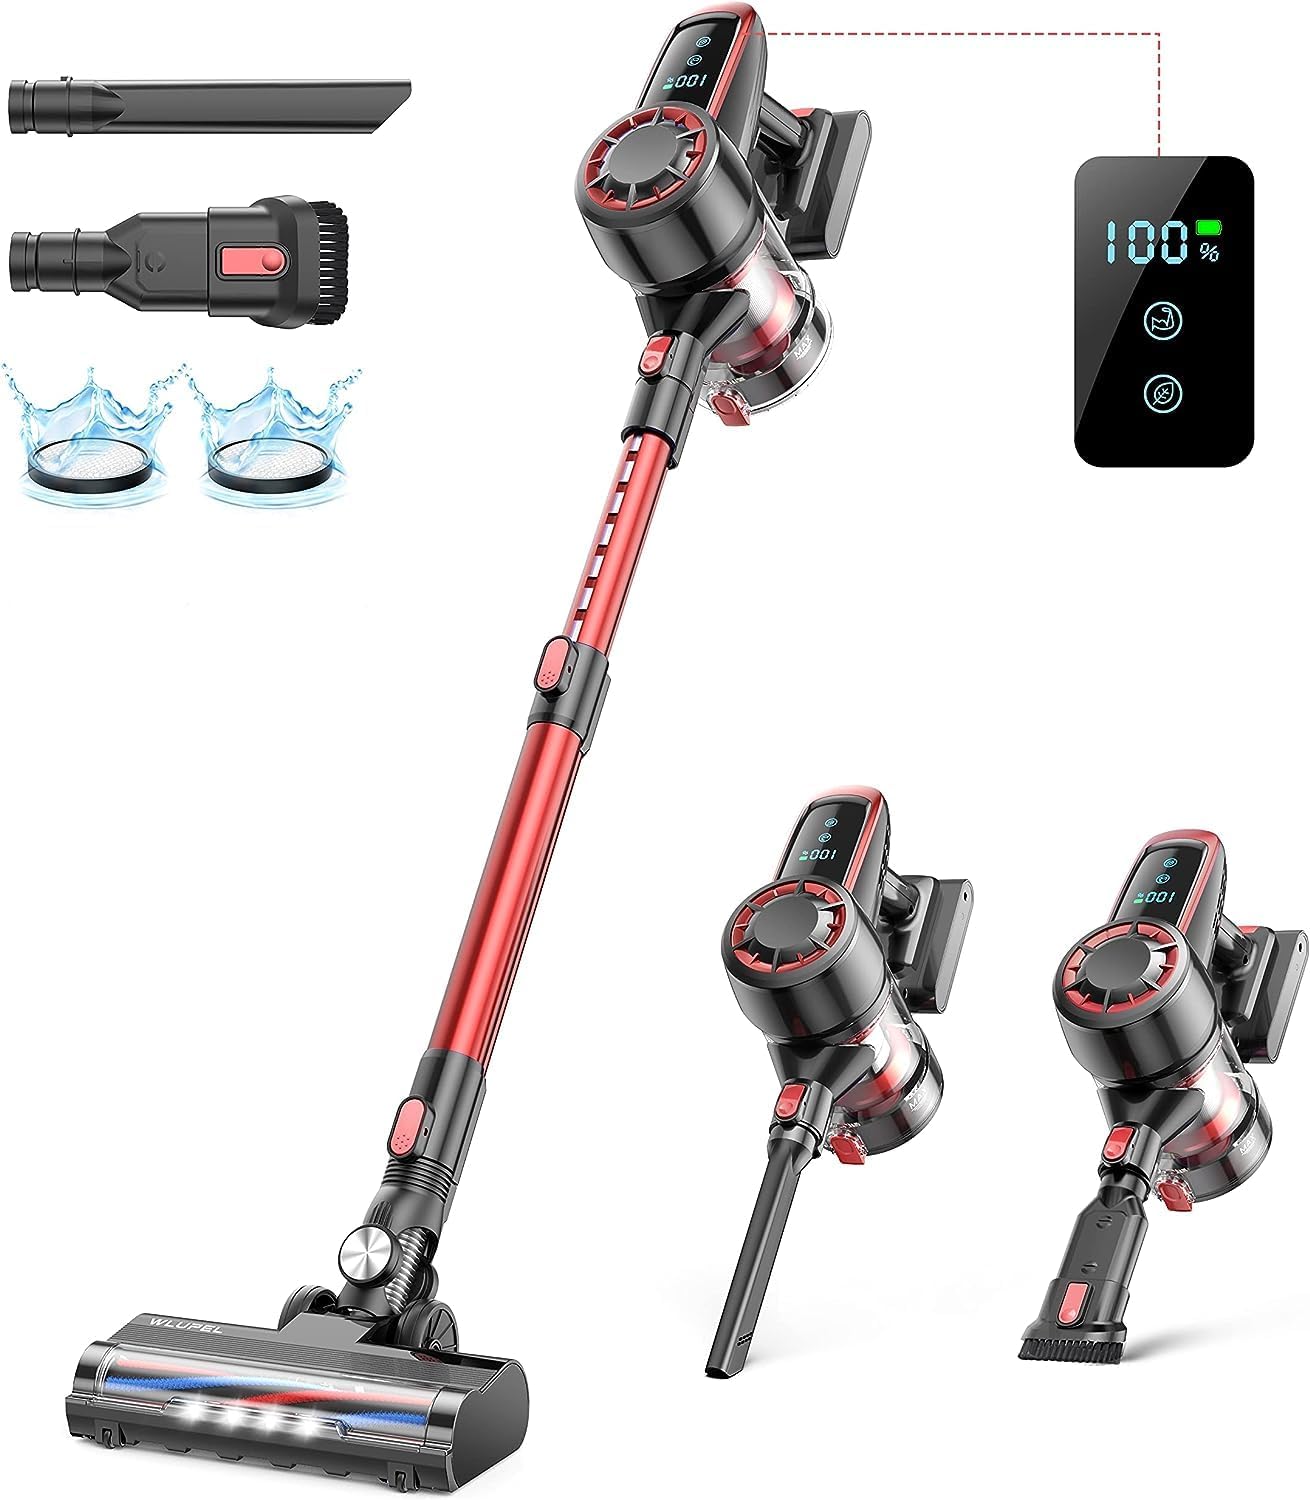 WLUPEL Cordless Vacuum Cleaner Review: Effortlessly Clean Your Home